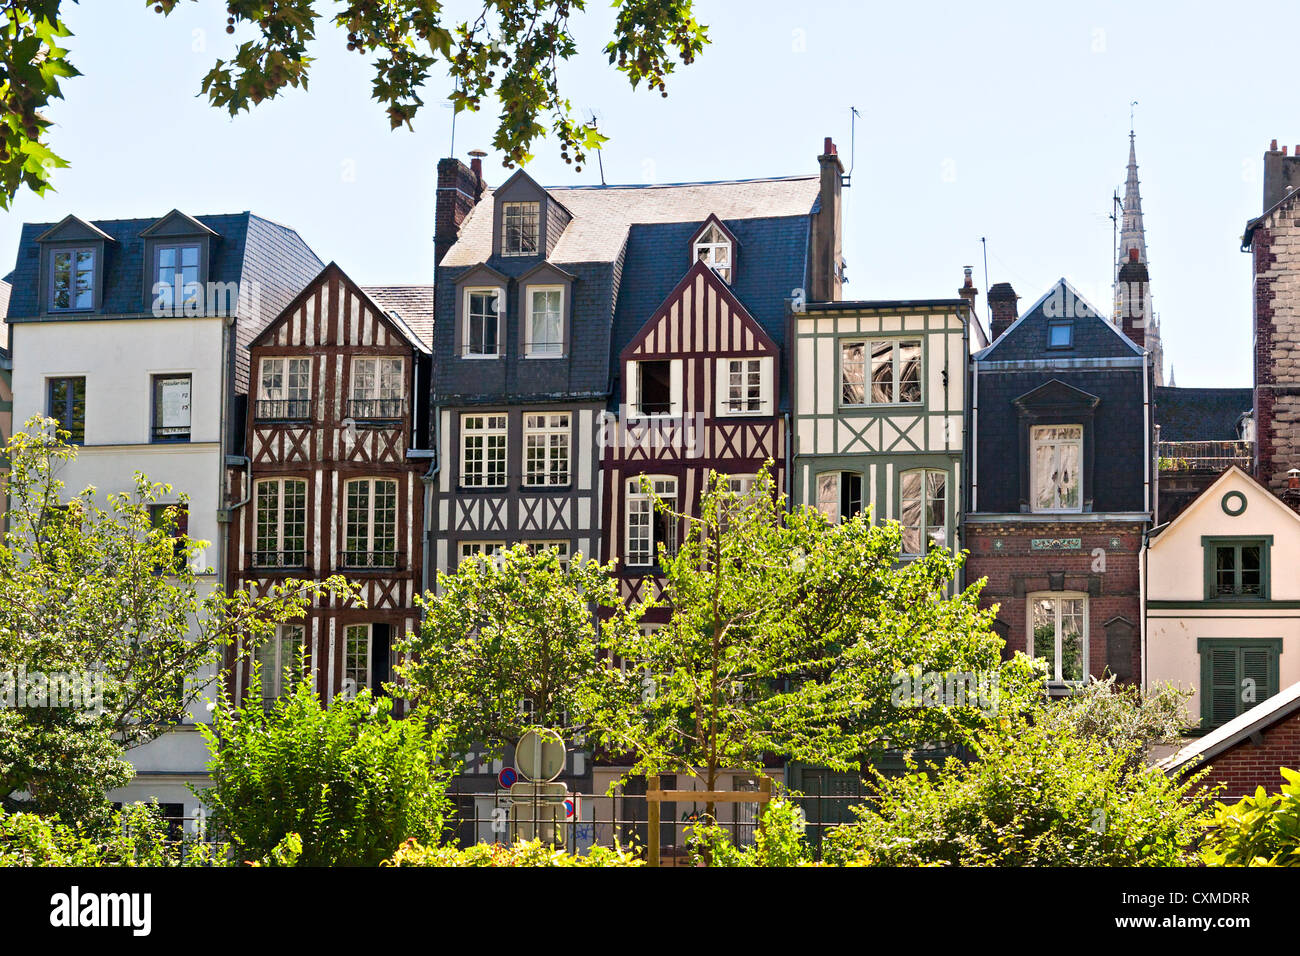 A Row of Half Timbered Houses in Rouen, Normandy, France Stock Photo